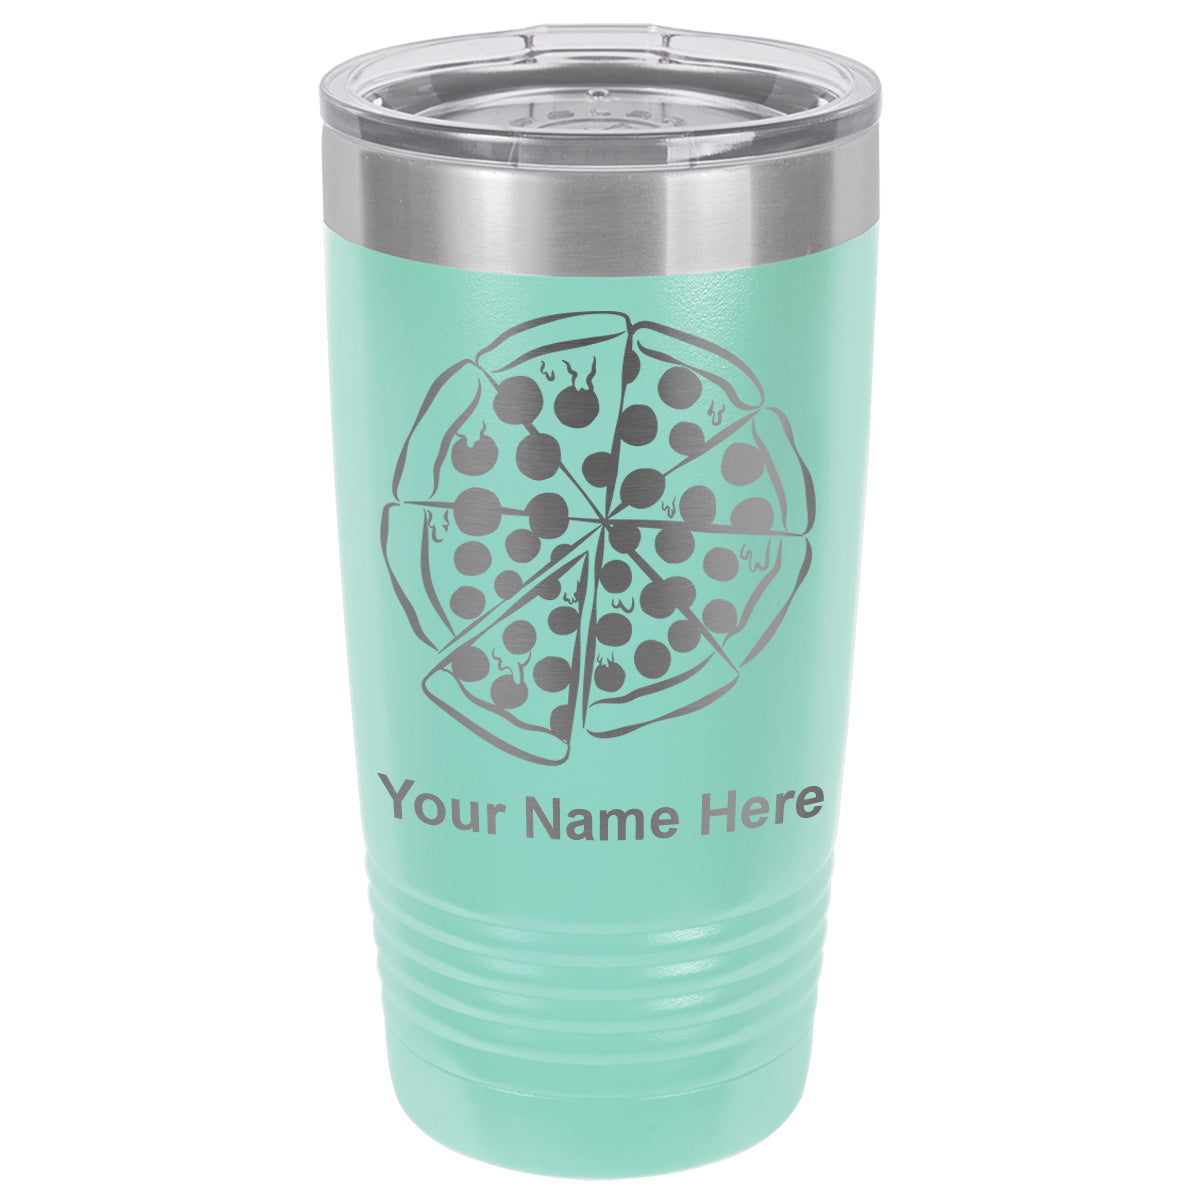 20oz Vacuum Insulated Tumbler Mug, Pizza, Personalized Engraving Included